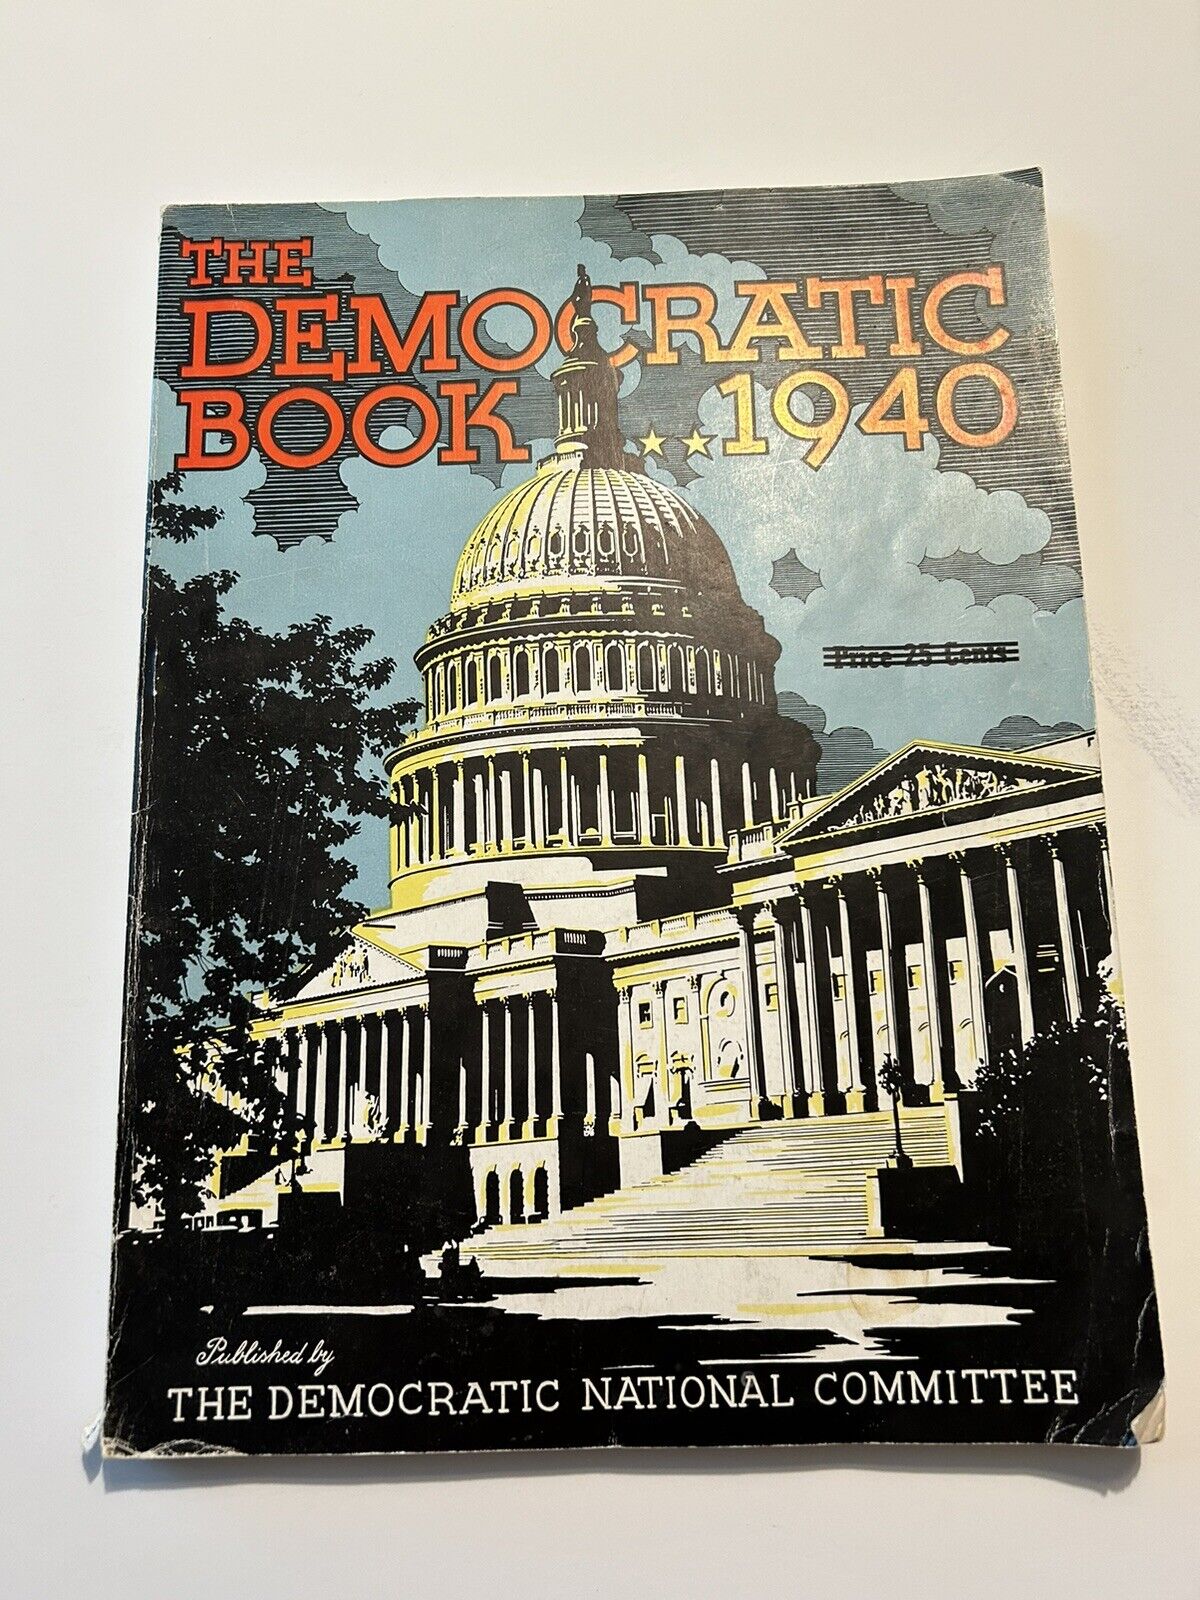 SALE 1940 Democratic Party authentic presidential election campaign book FDR